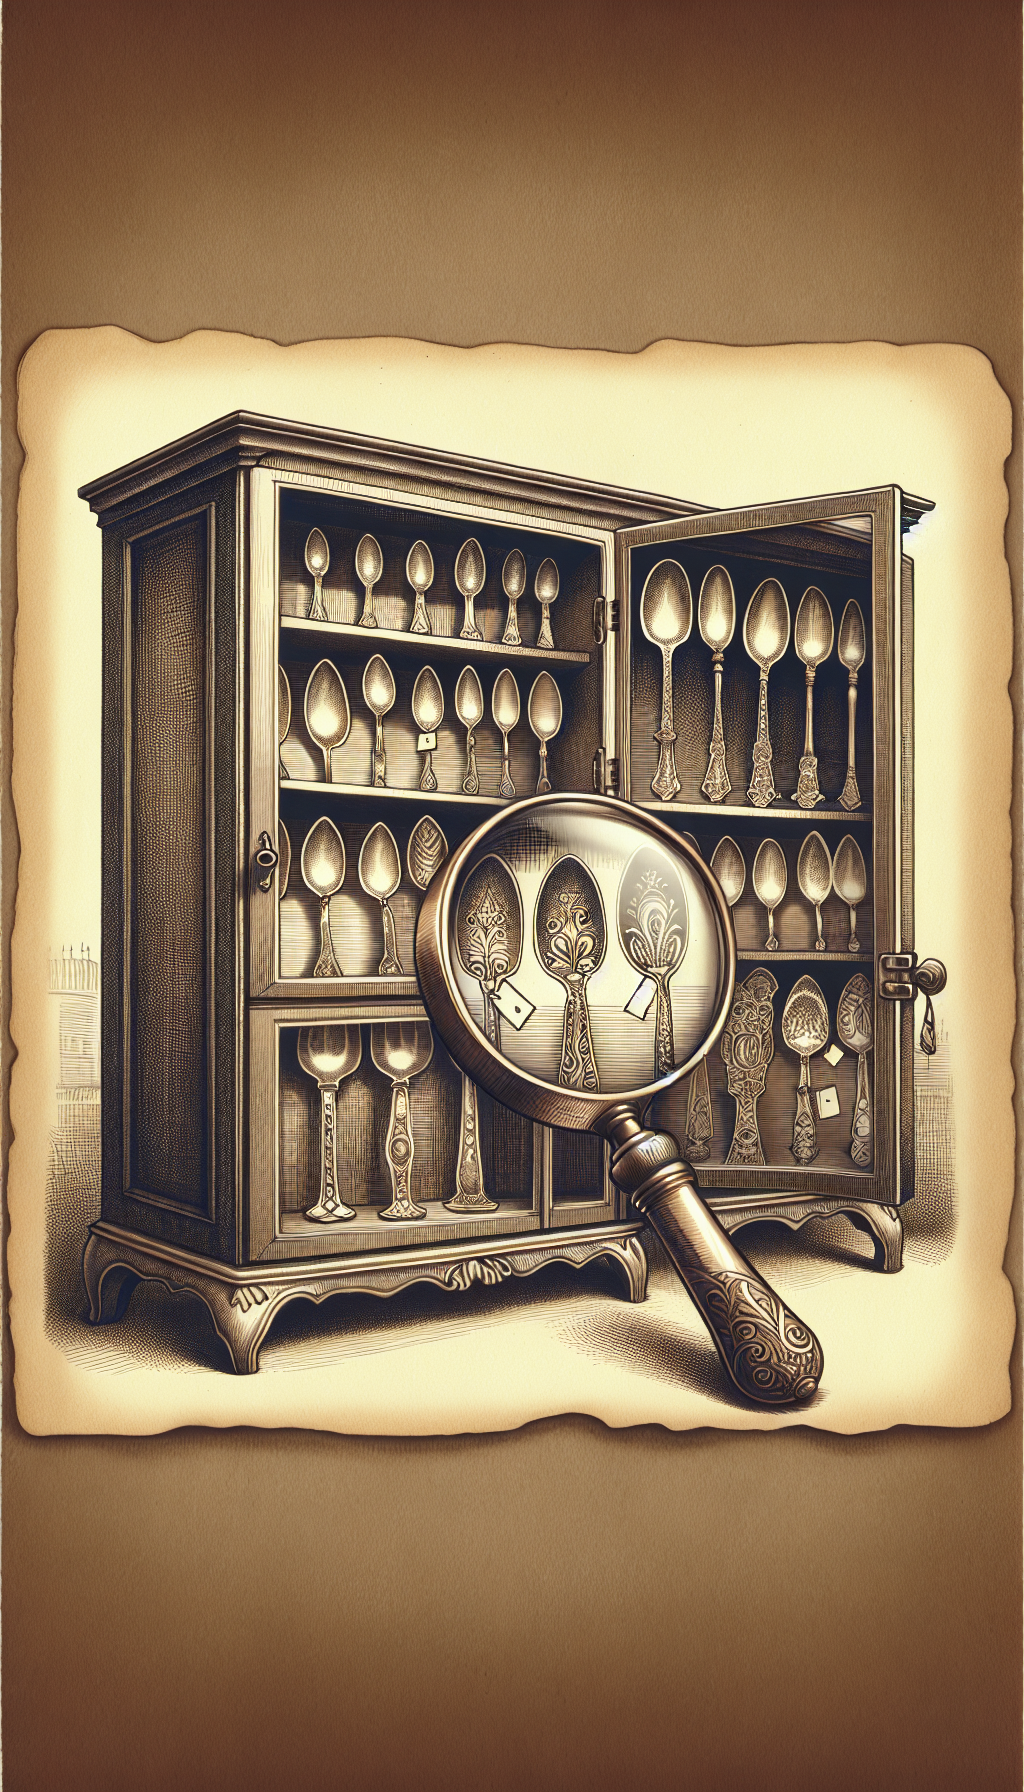 An intricately designed illustration showcases a vintage cabinet with glass doors, inside of which stands a row of antique spoons on ornate stands, each labeled with a small, elegant tag identifying its era. In the foreground, a magnifying glass hovers over one spoon, highlighting its unique patterns, while a soft, sepia-toned background suggests the passage of time.